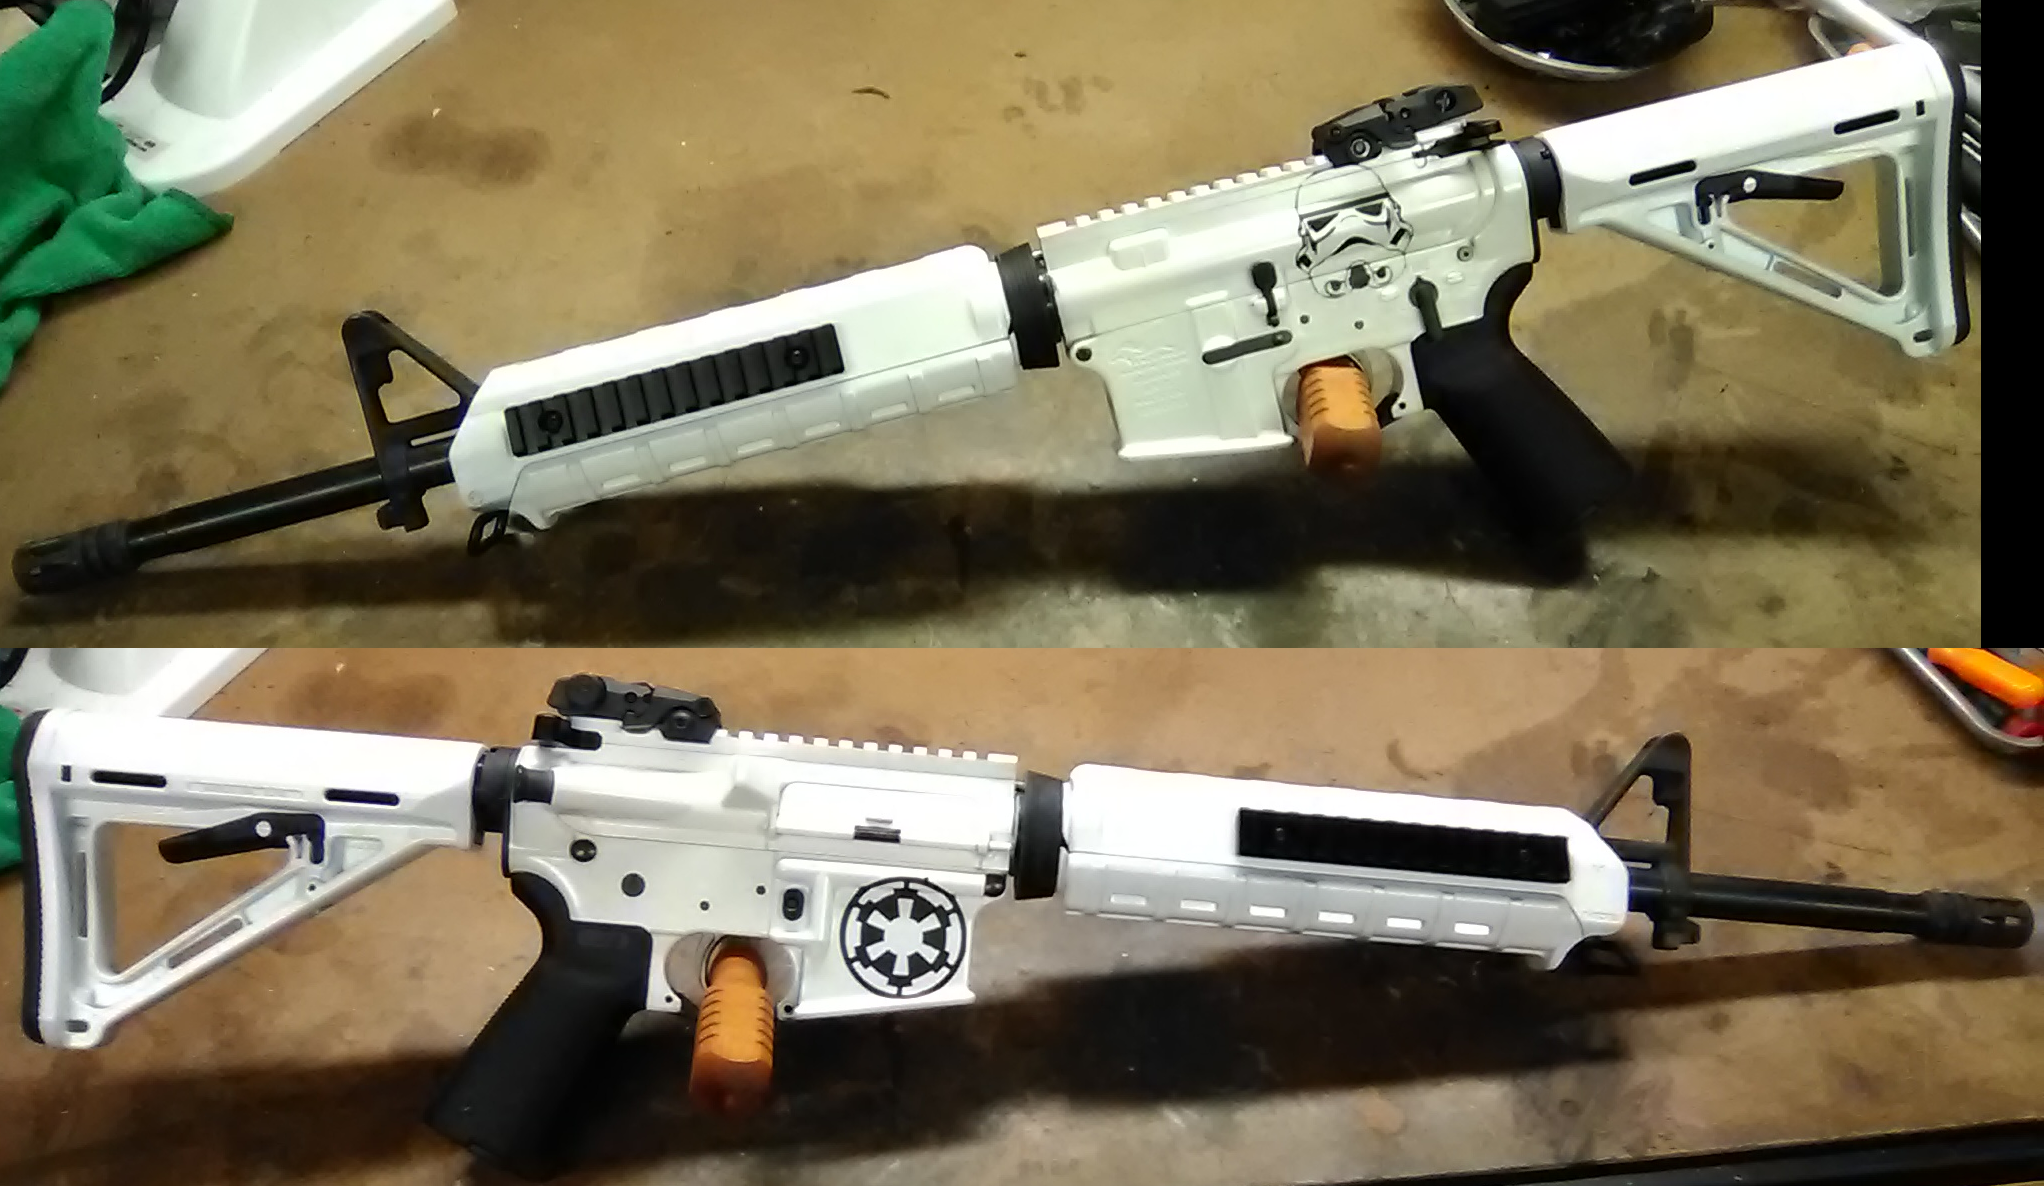 Here's a few of the more recent Cerakote paint jobs that I have done f...